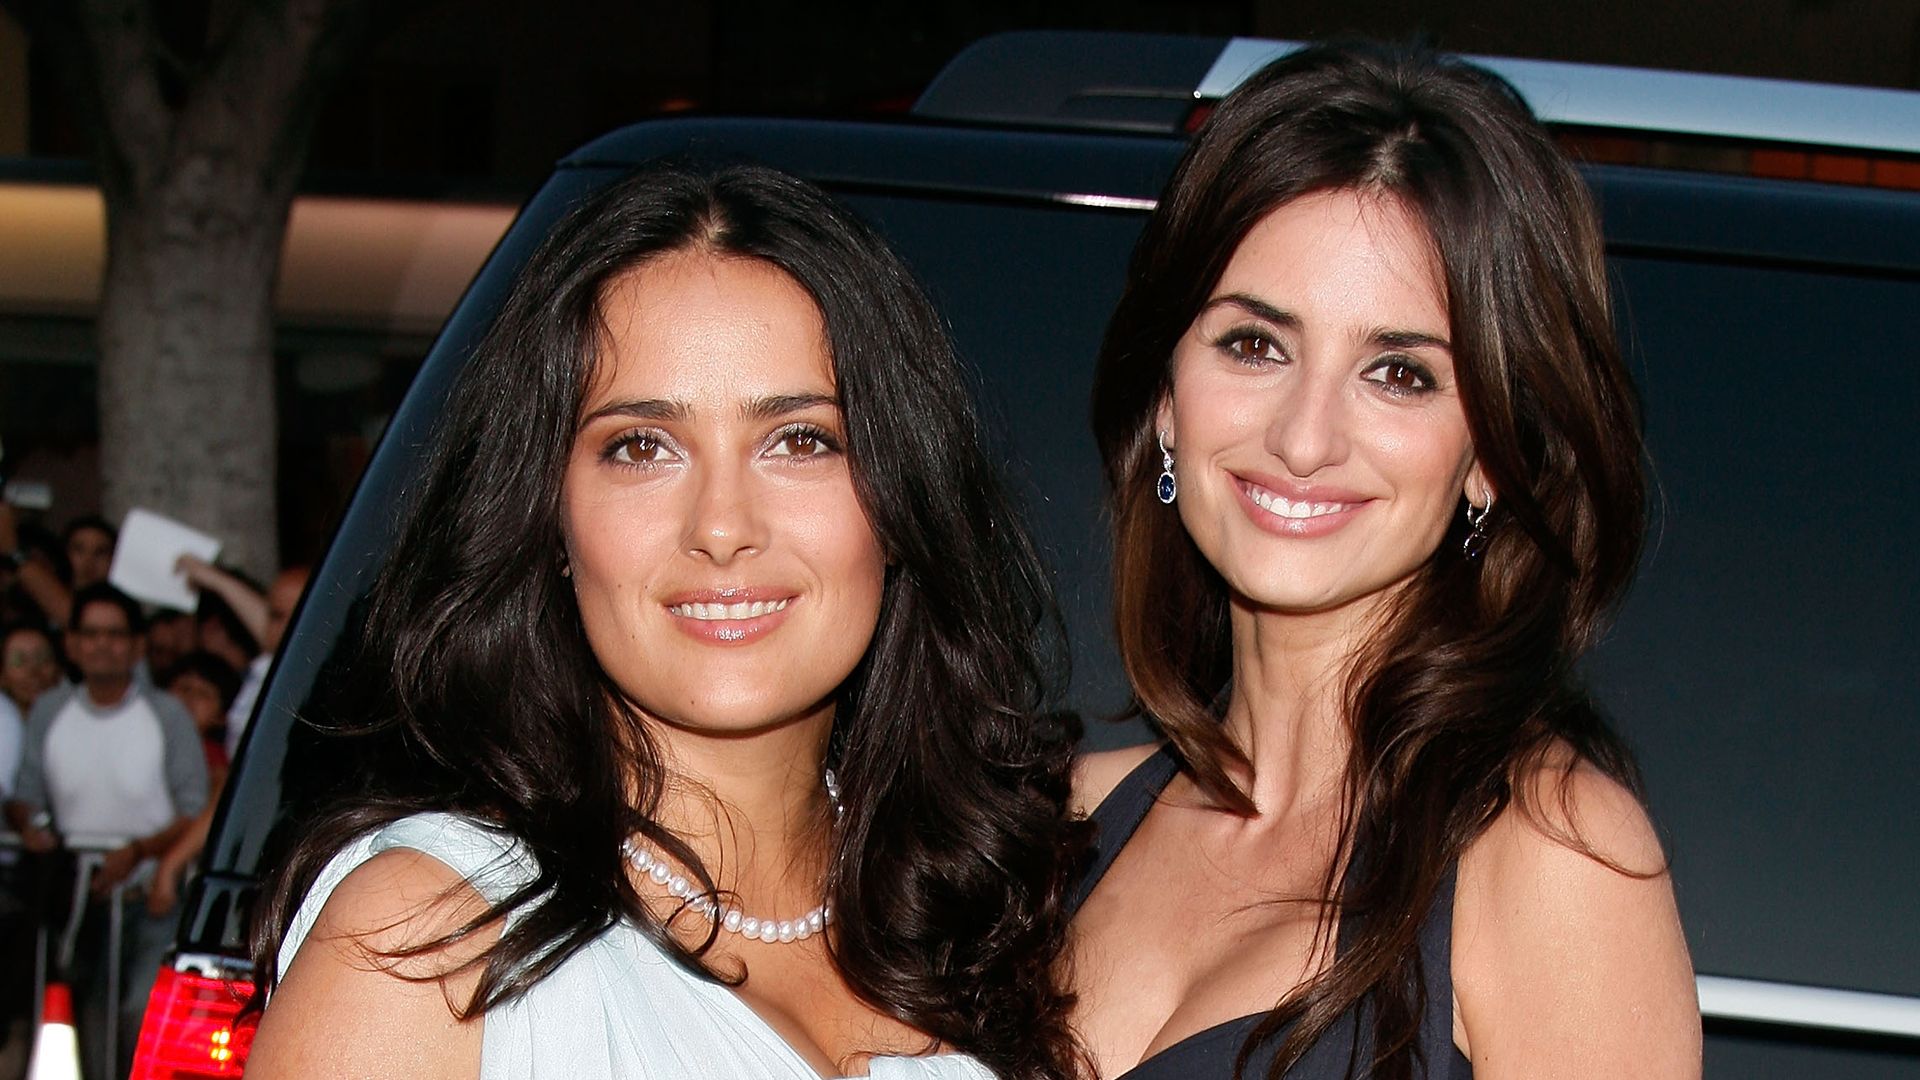 Salma Hayek and Penélope Cruz arrive on the red carpet at the premiere of "Vicky Cristina Barcelona" on August 4, 2008 in Westwood, California